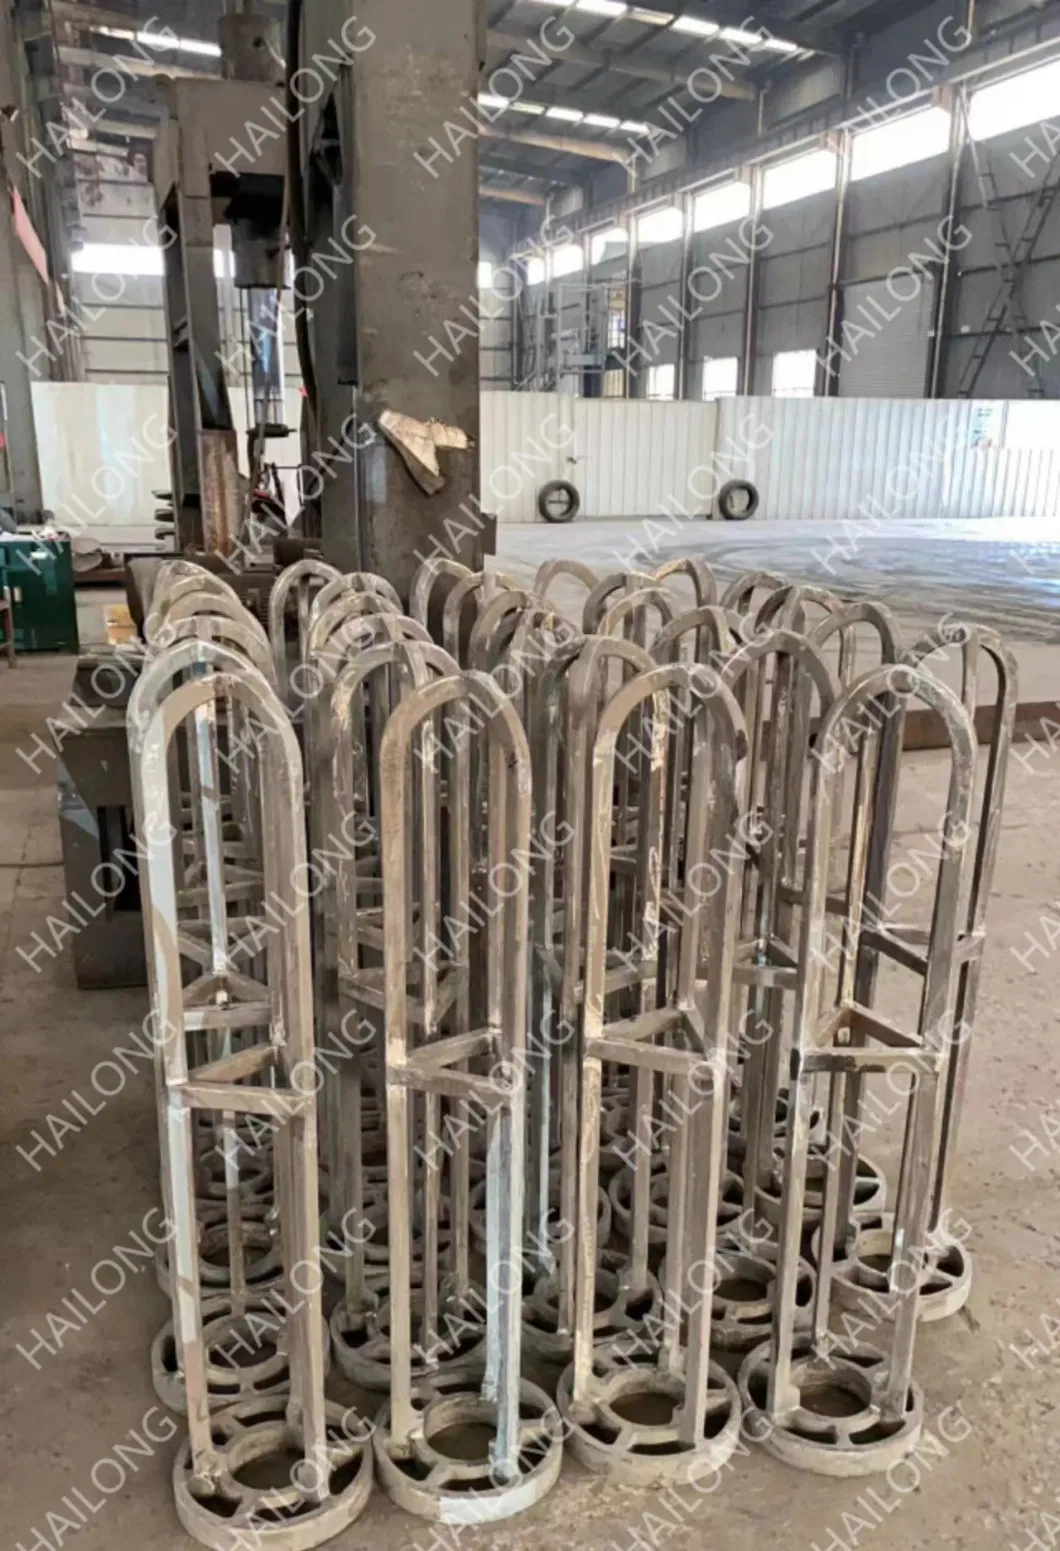 Carburizing and Quenching Hanger, Hanger and Multi-Purpose Furnace Fixture for Heat-Resistant Steel Castings